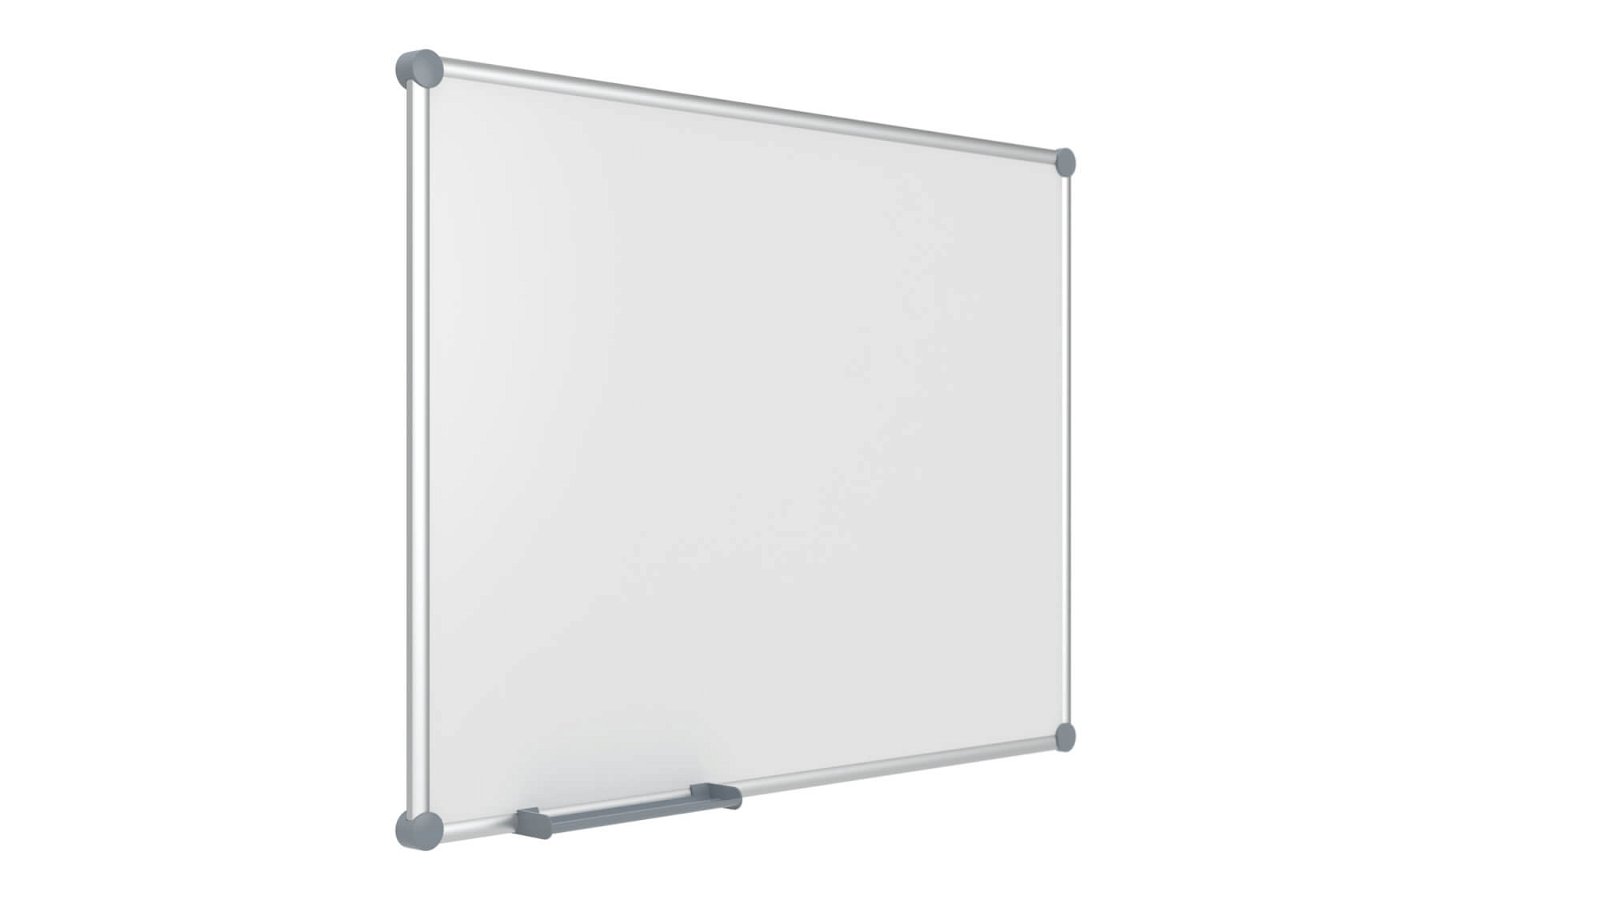 Whiteboard 2000 MAULpro, Emaille, 90x120 cm, grau